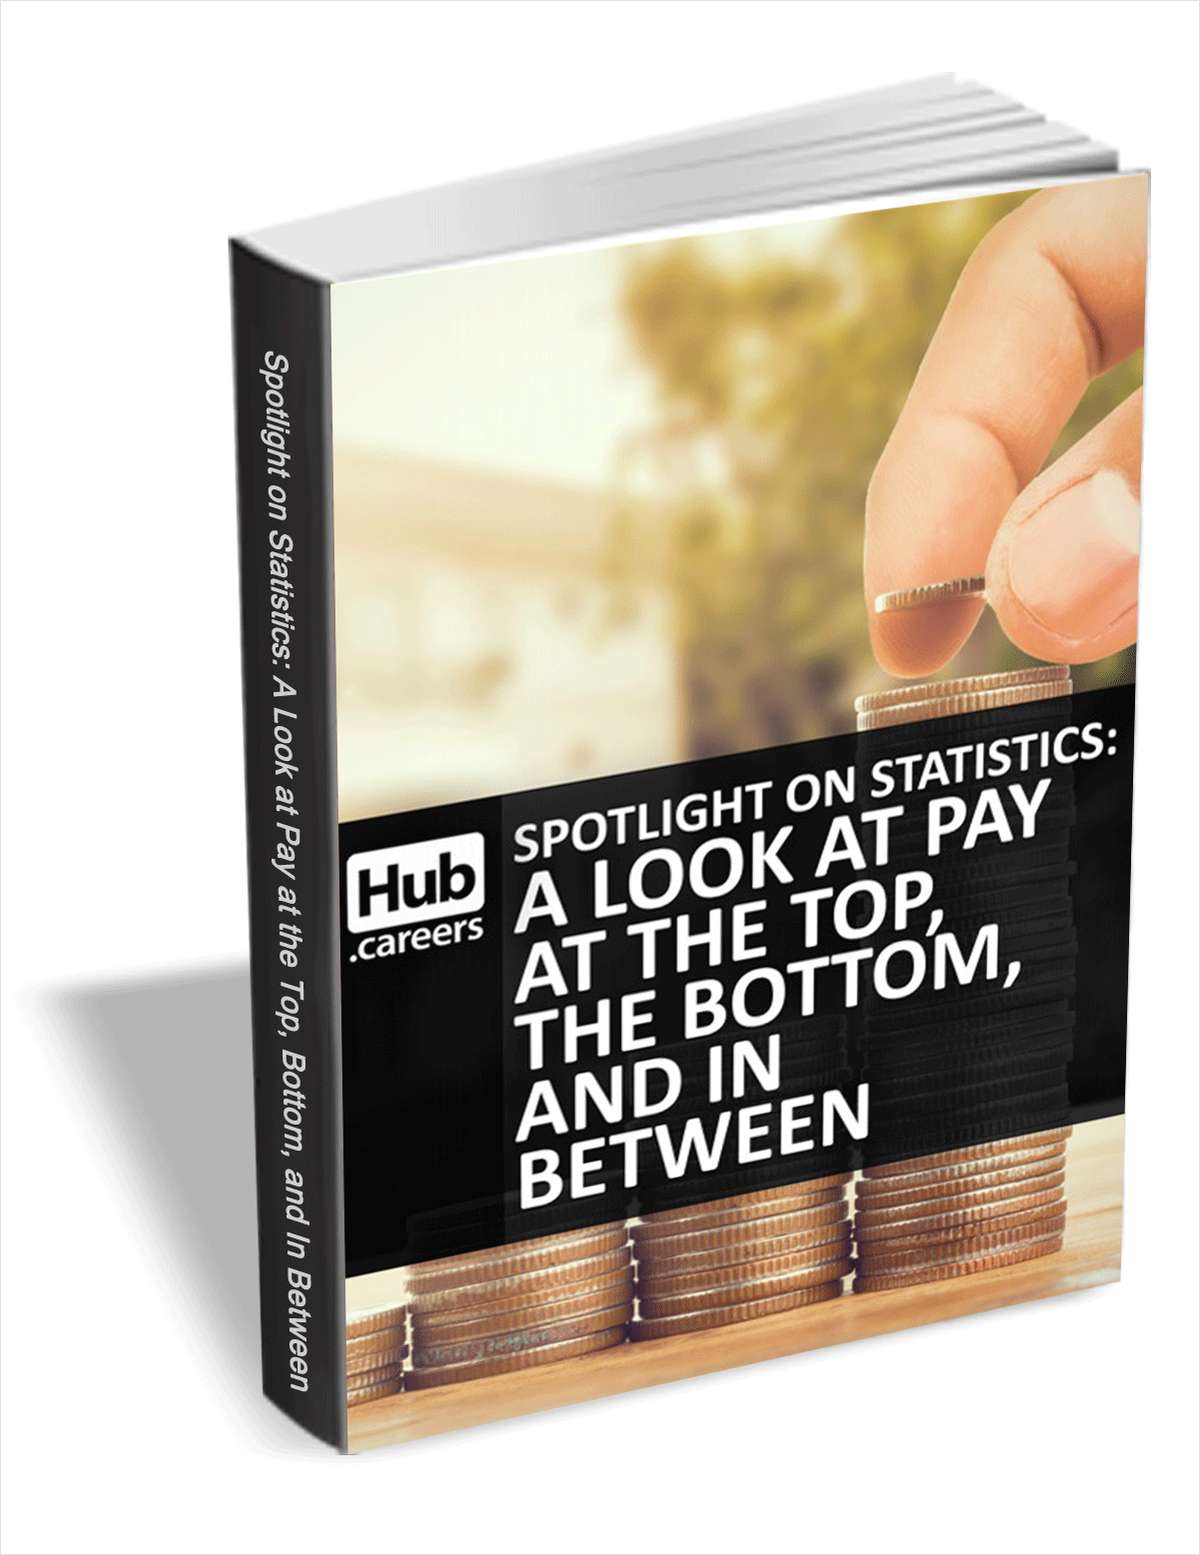 A Look At Pay At The Top, The Bottom, And In Between - Spotlight on Statistics